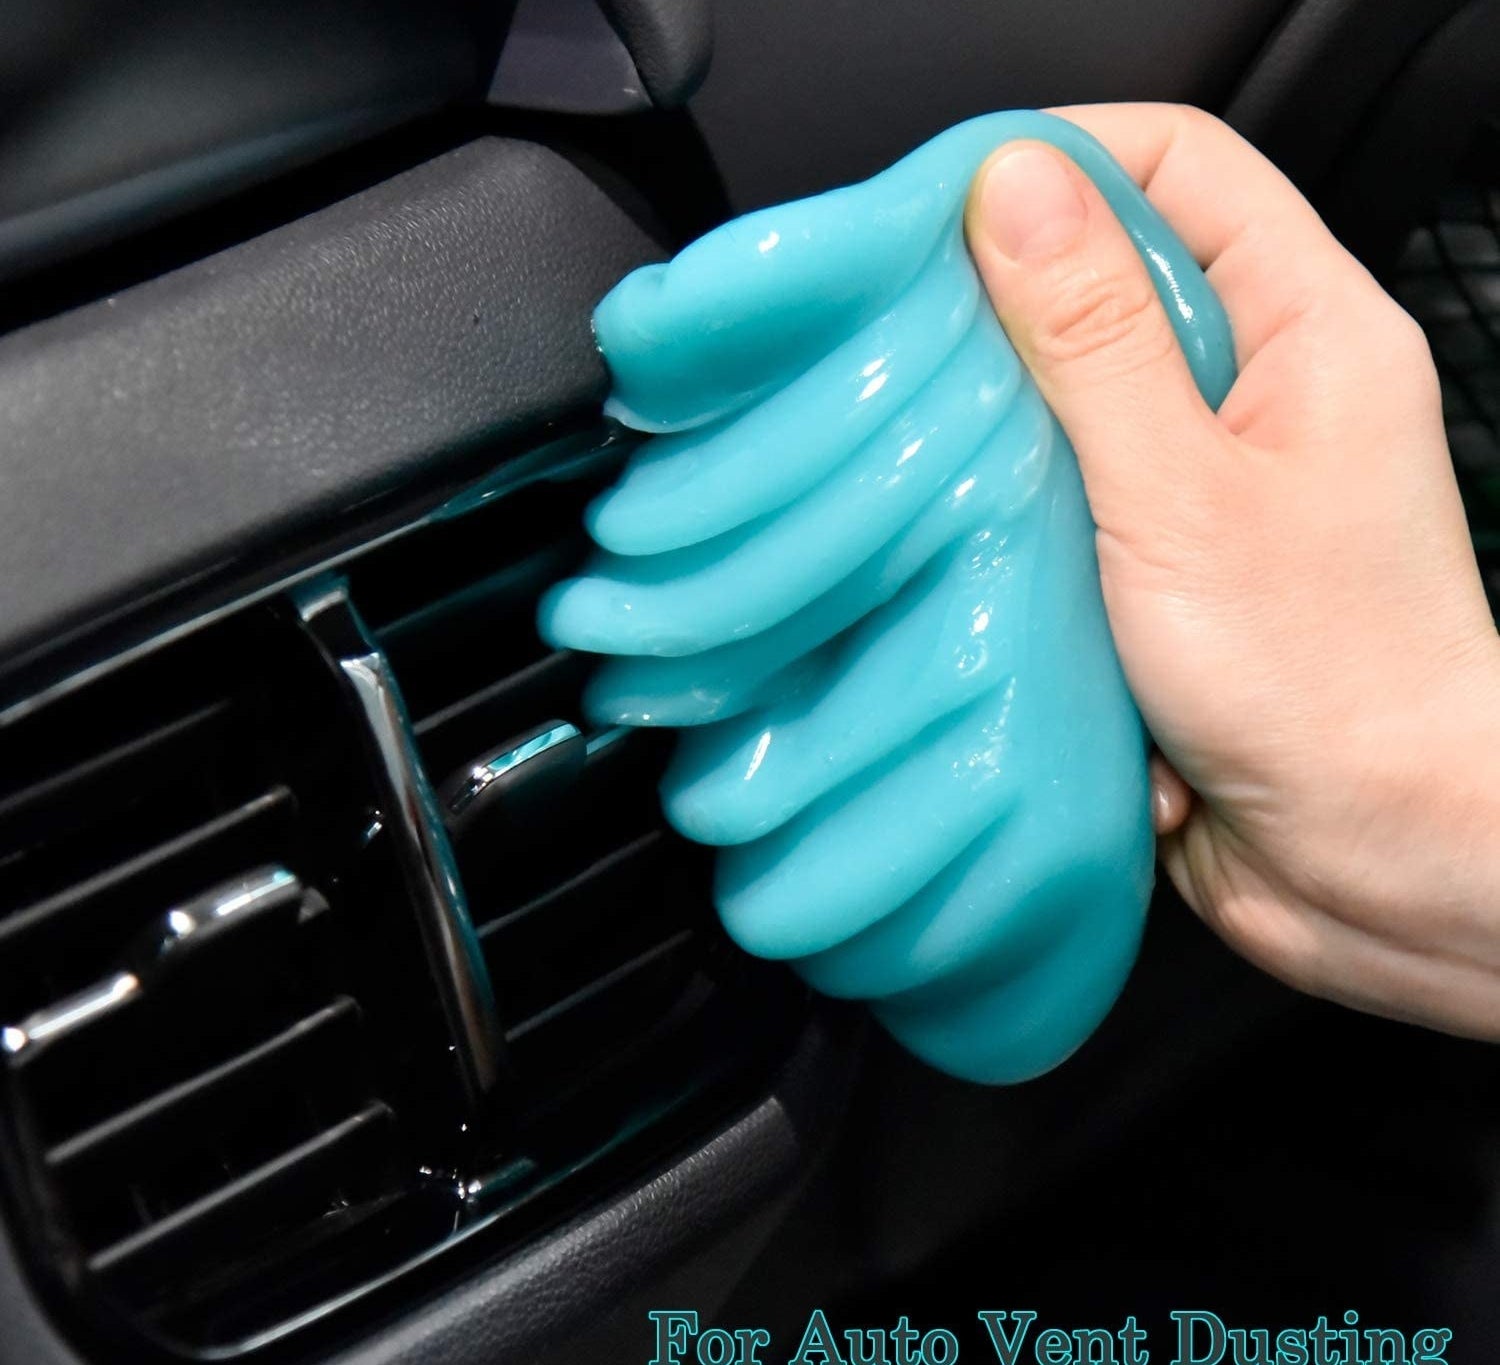 A person using the cleaning gel on a vent inside of a car